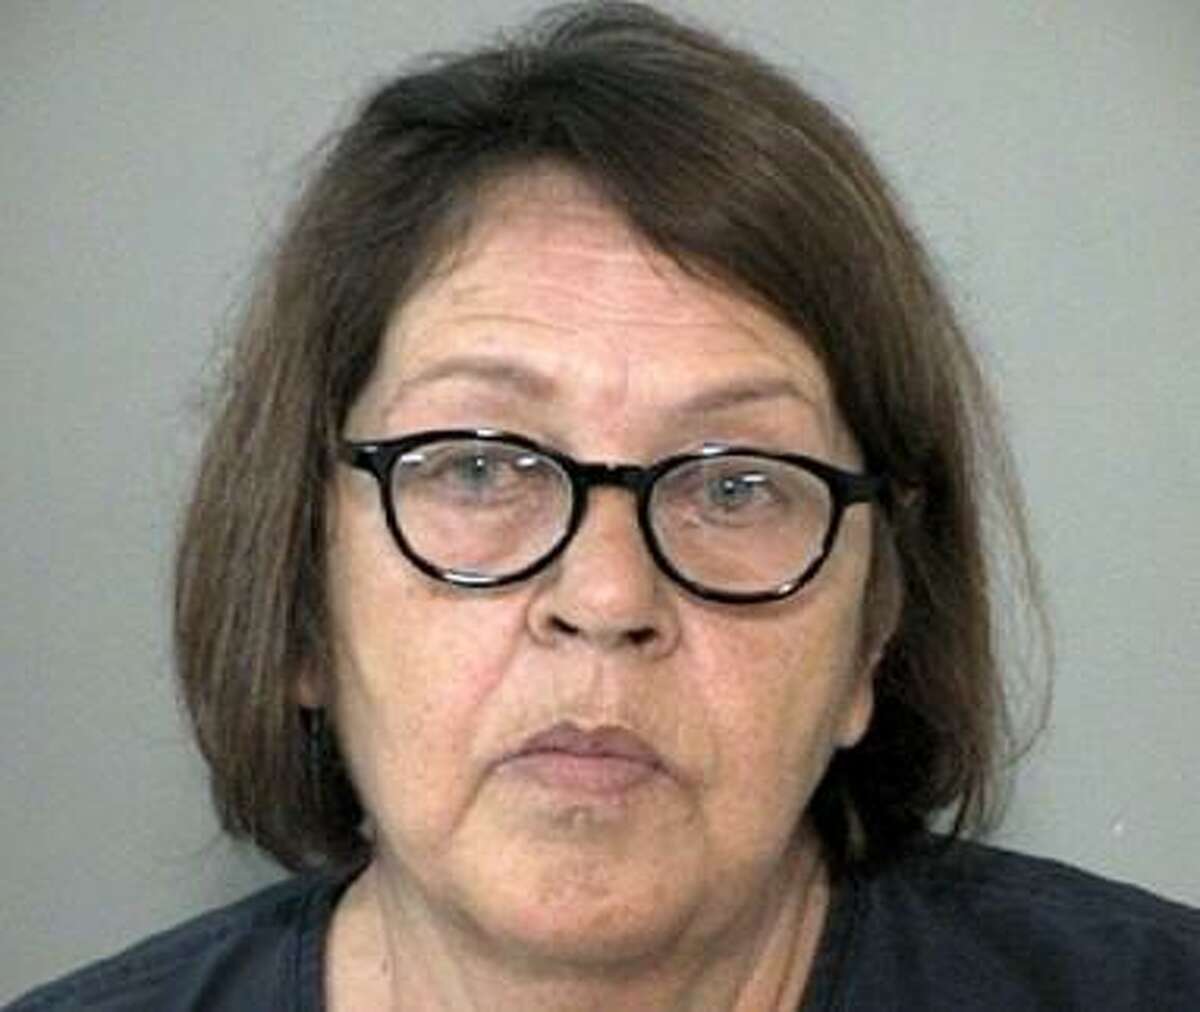 Deborah Sutter, age 68, was found guilty of sexually assaulting a child in the Fort Bend County Juvenile Detention Center.